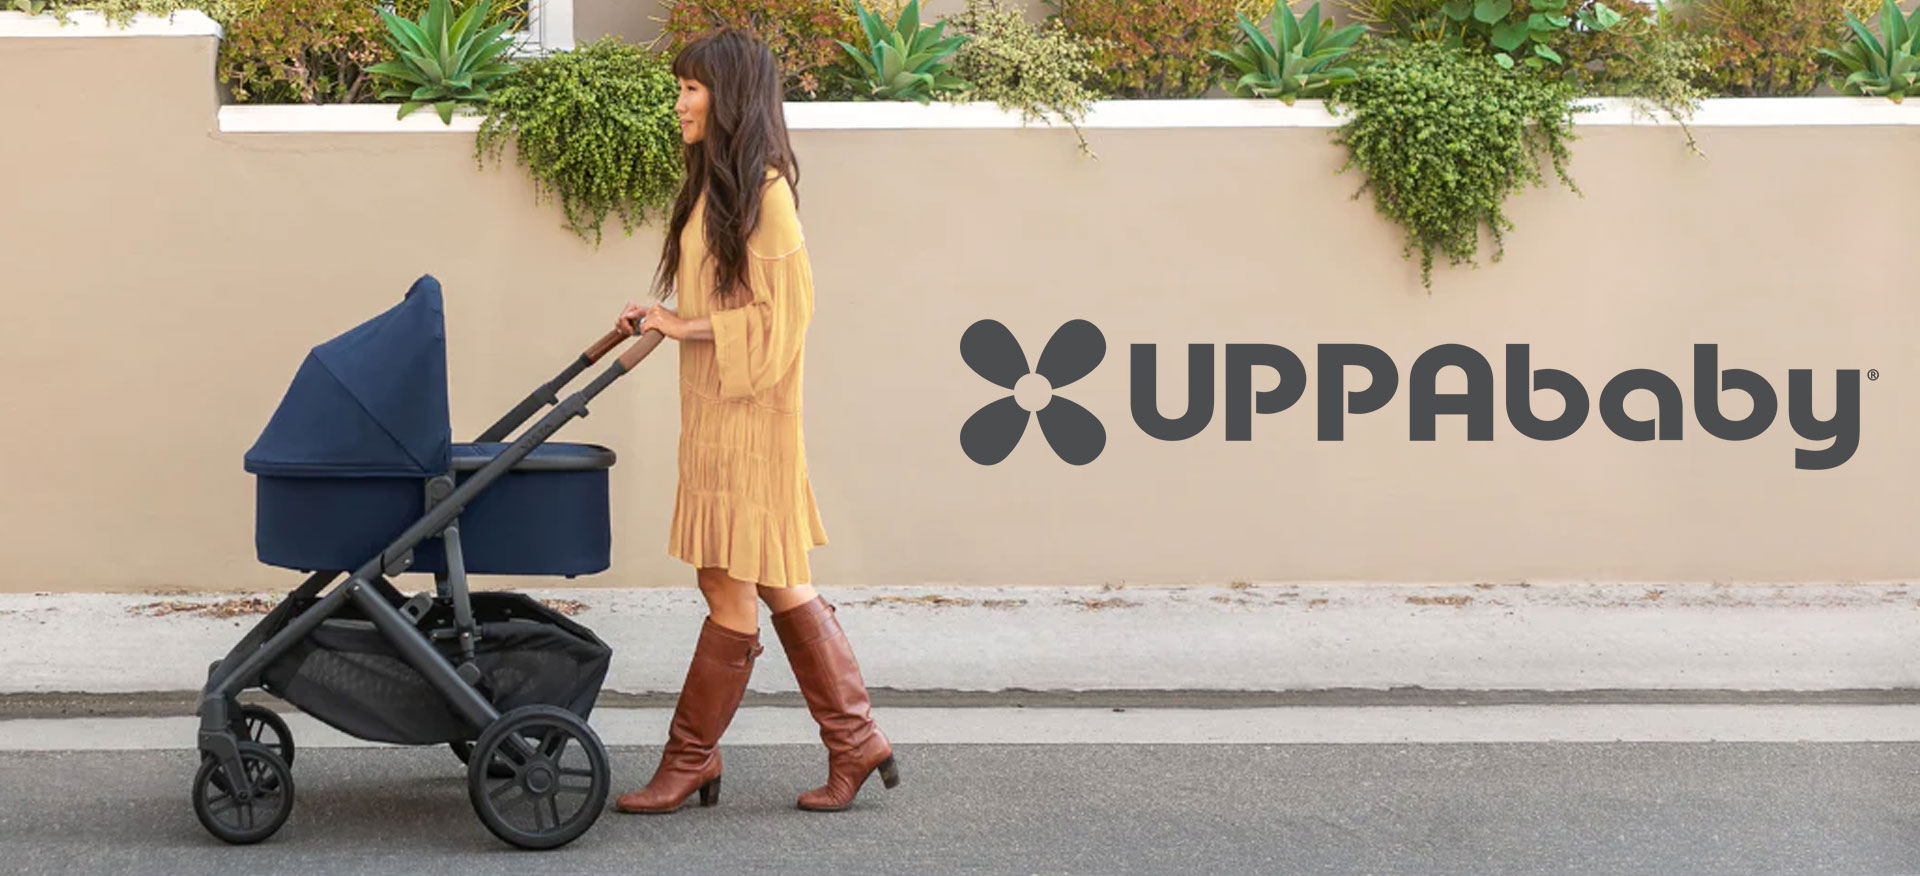 uppababy-banner-1920x879